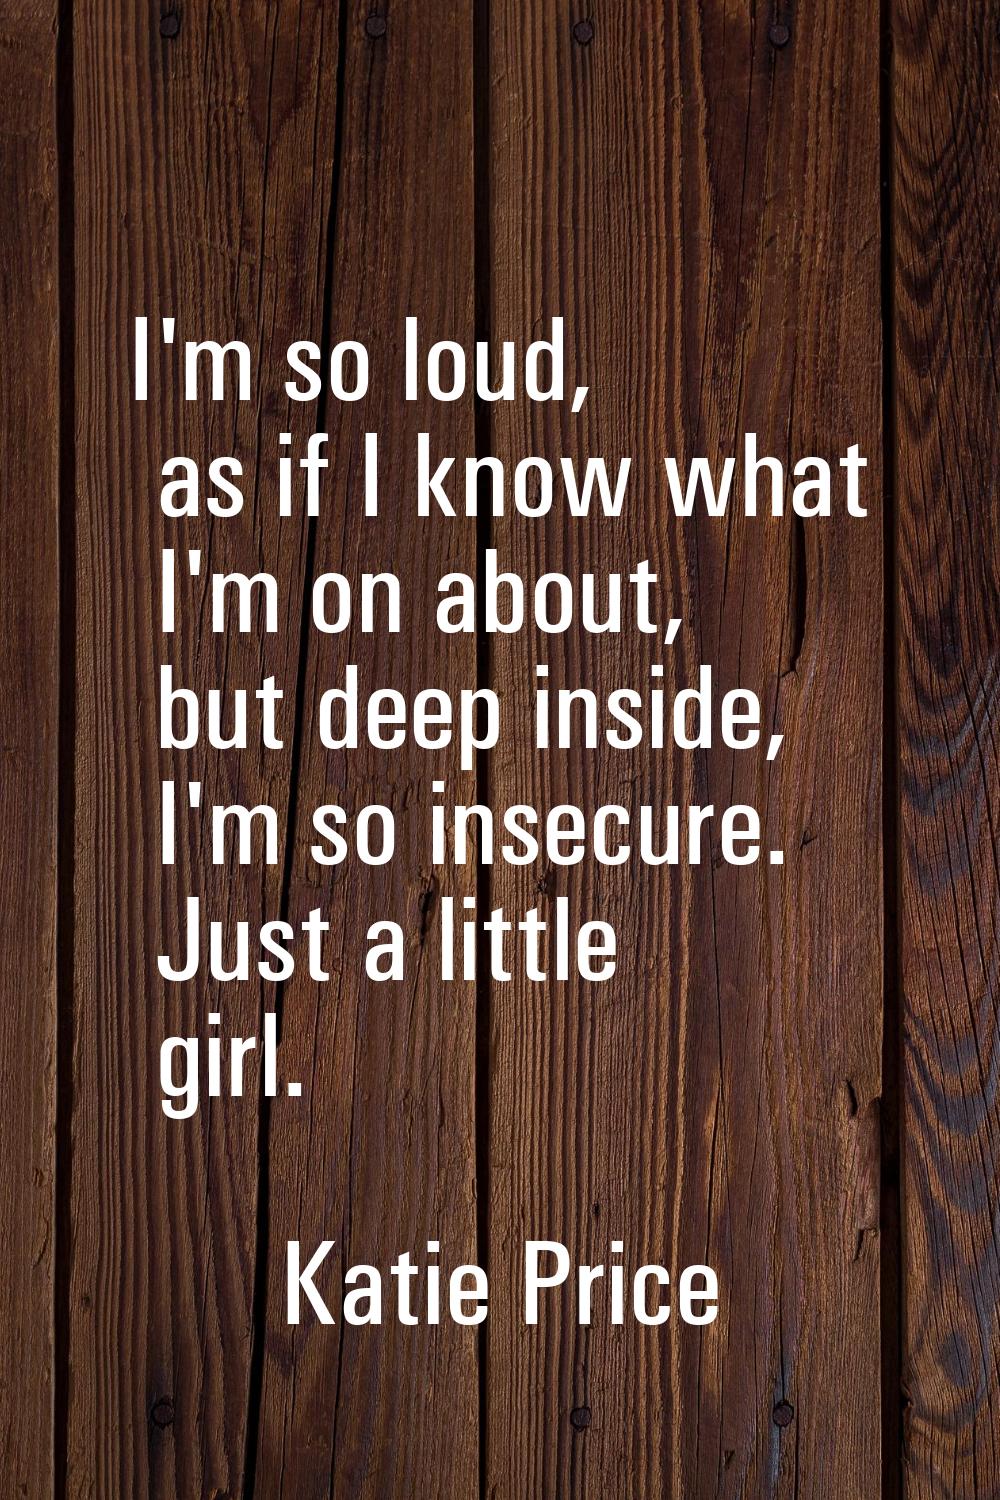 I'm so loud, as if I know what I'm on about, but deep inside, I'm so insecure. Just a little girl.